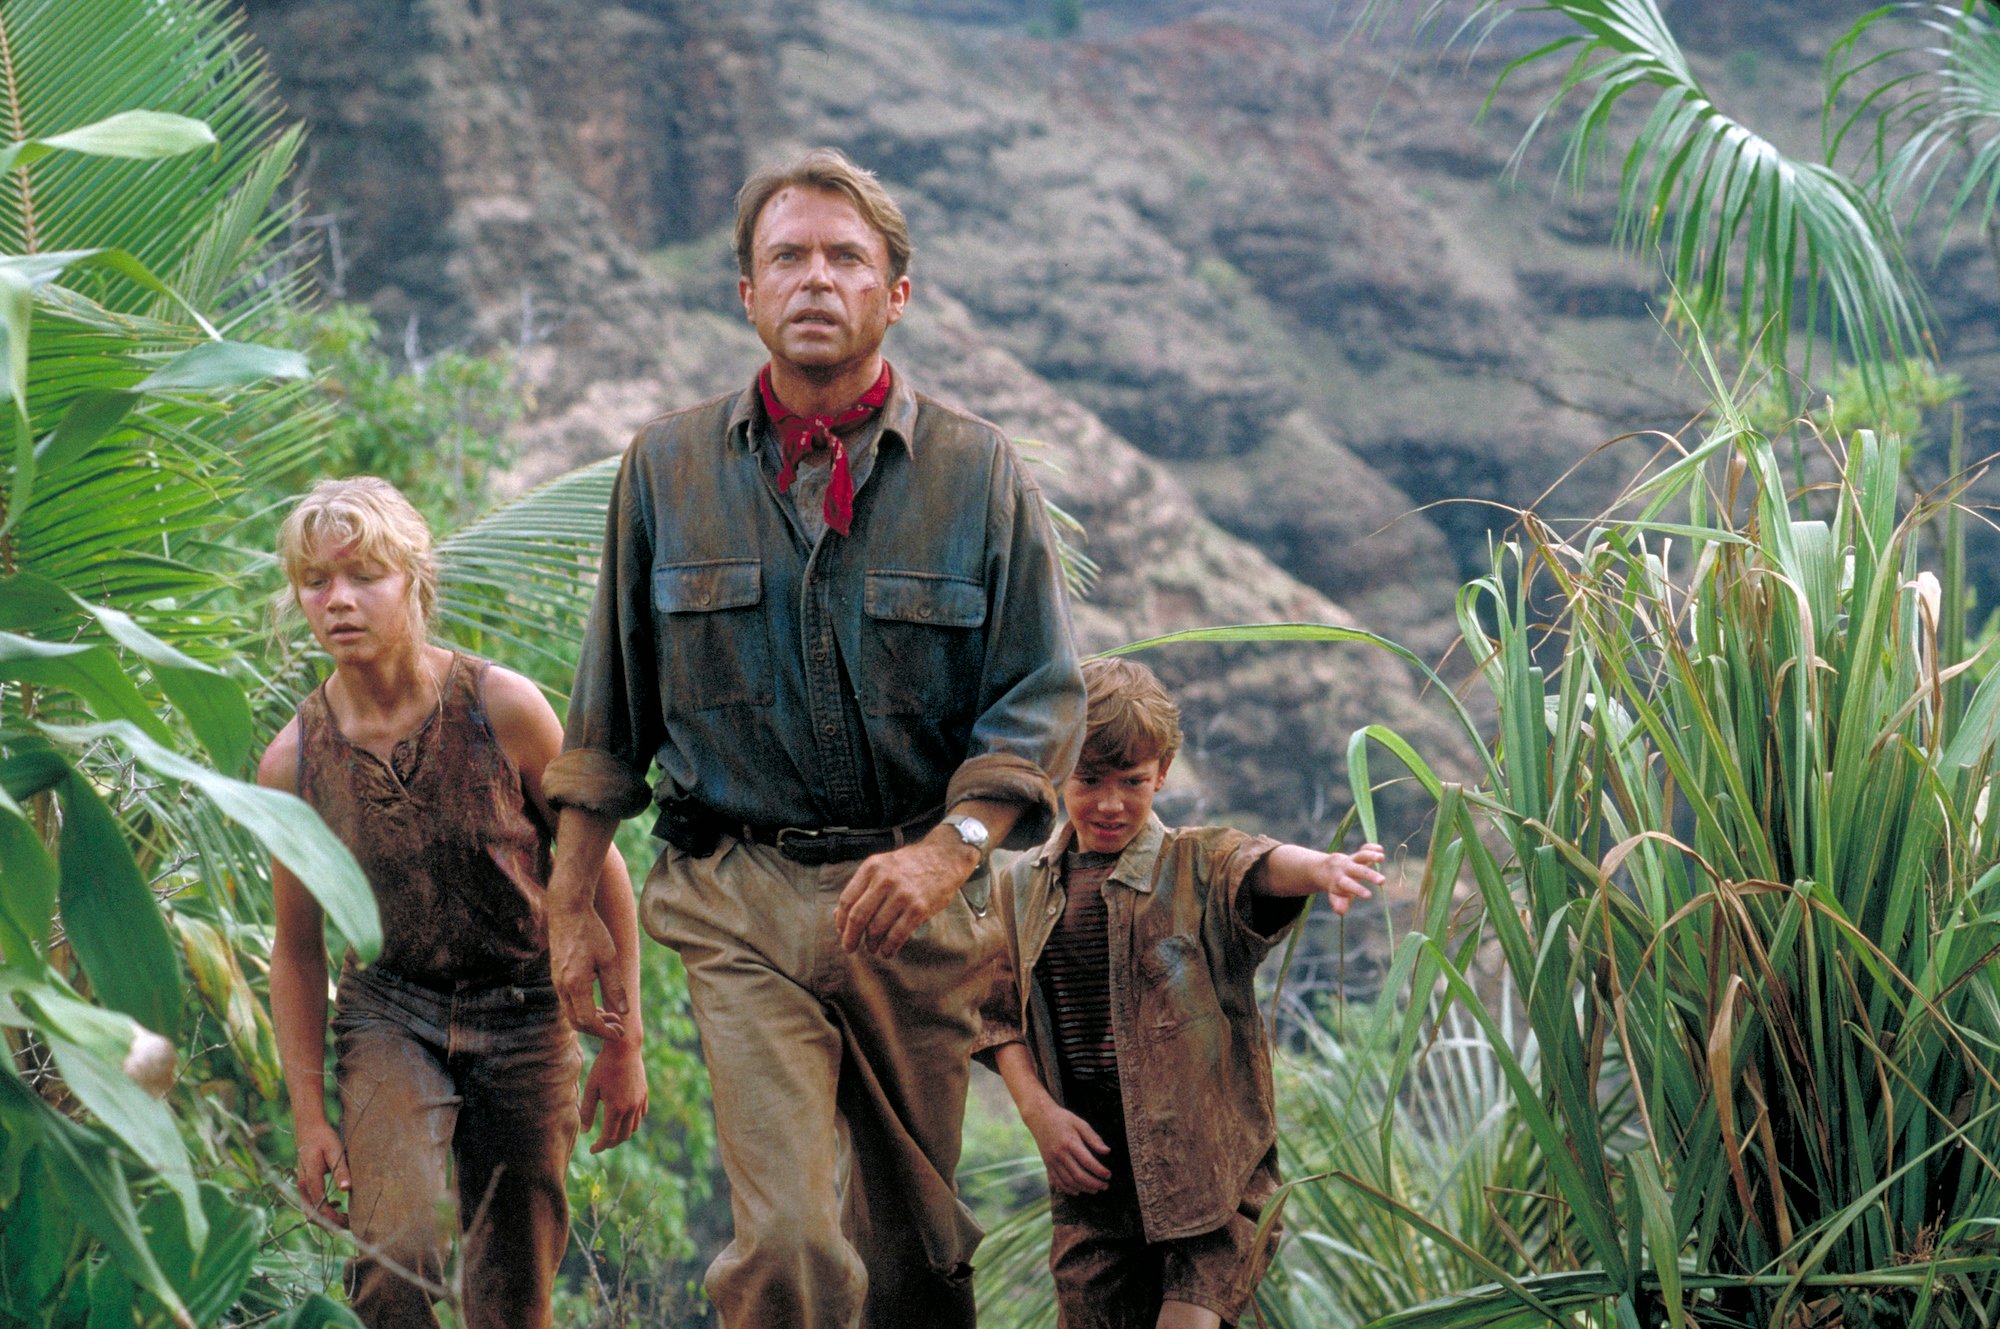 Sam Neill as Dr. Alan Grant, with Ariana Richards and Joseph Mazzello as Lex and Tim 